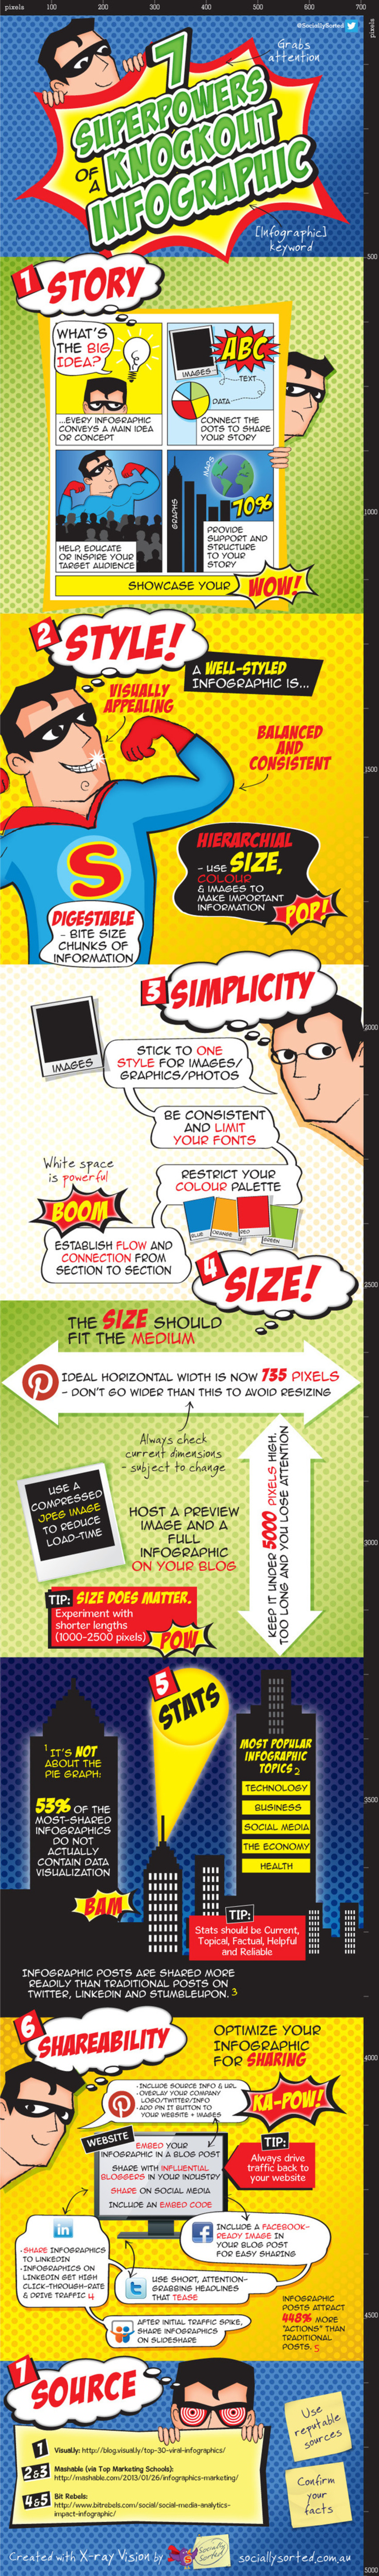 7 Superpowers of a Knockout Infographic - How to Get More Shares and Drive Traffic | Socially Sorted | #TheMarketingAutomationAlert | The MarTech Digest | Scoop.it